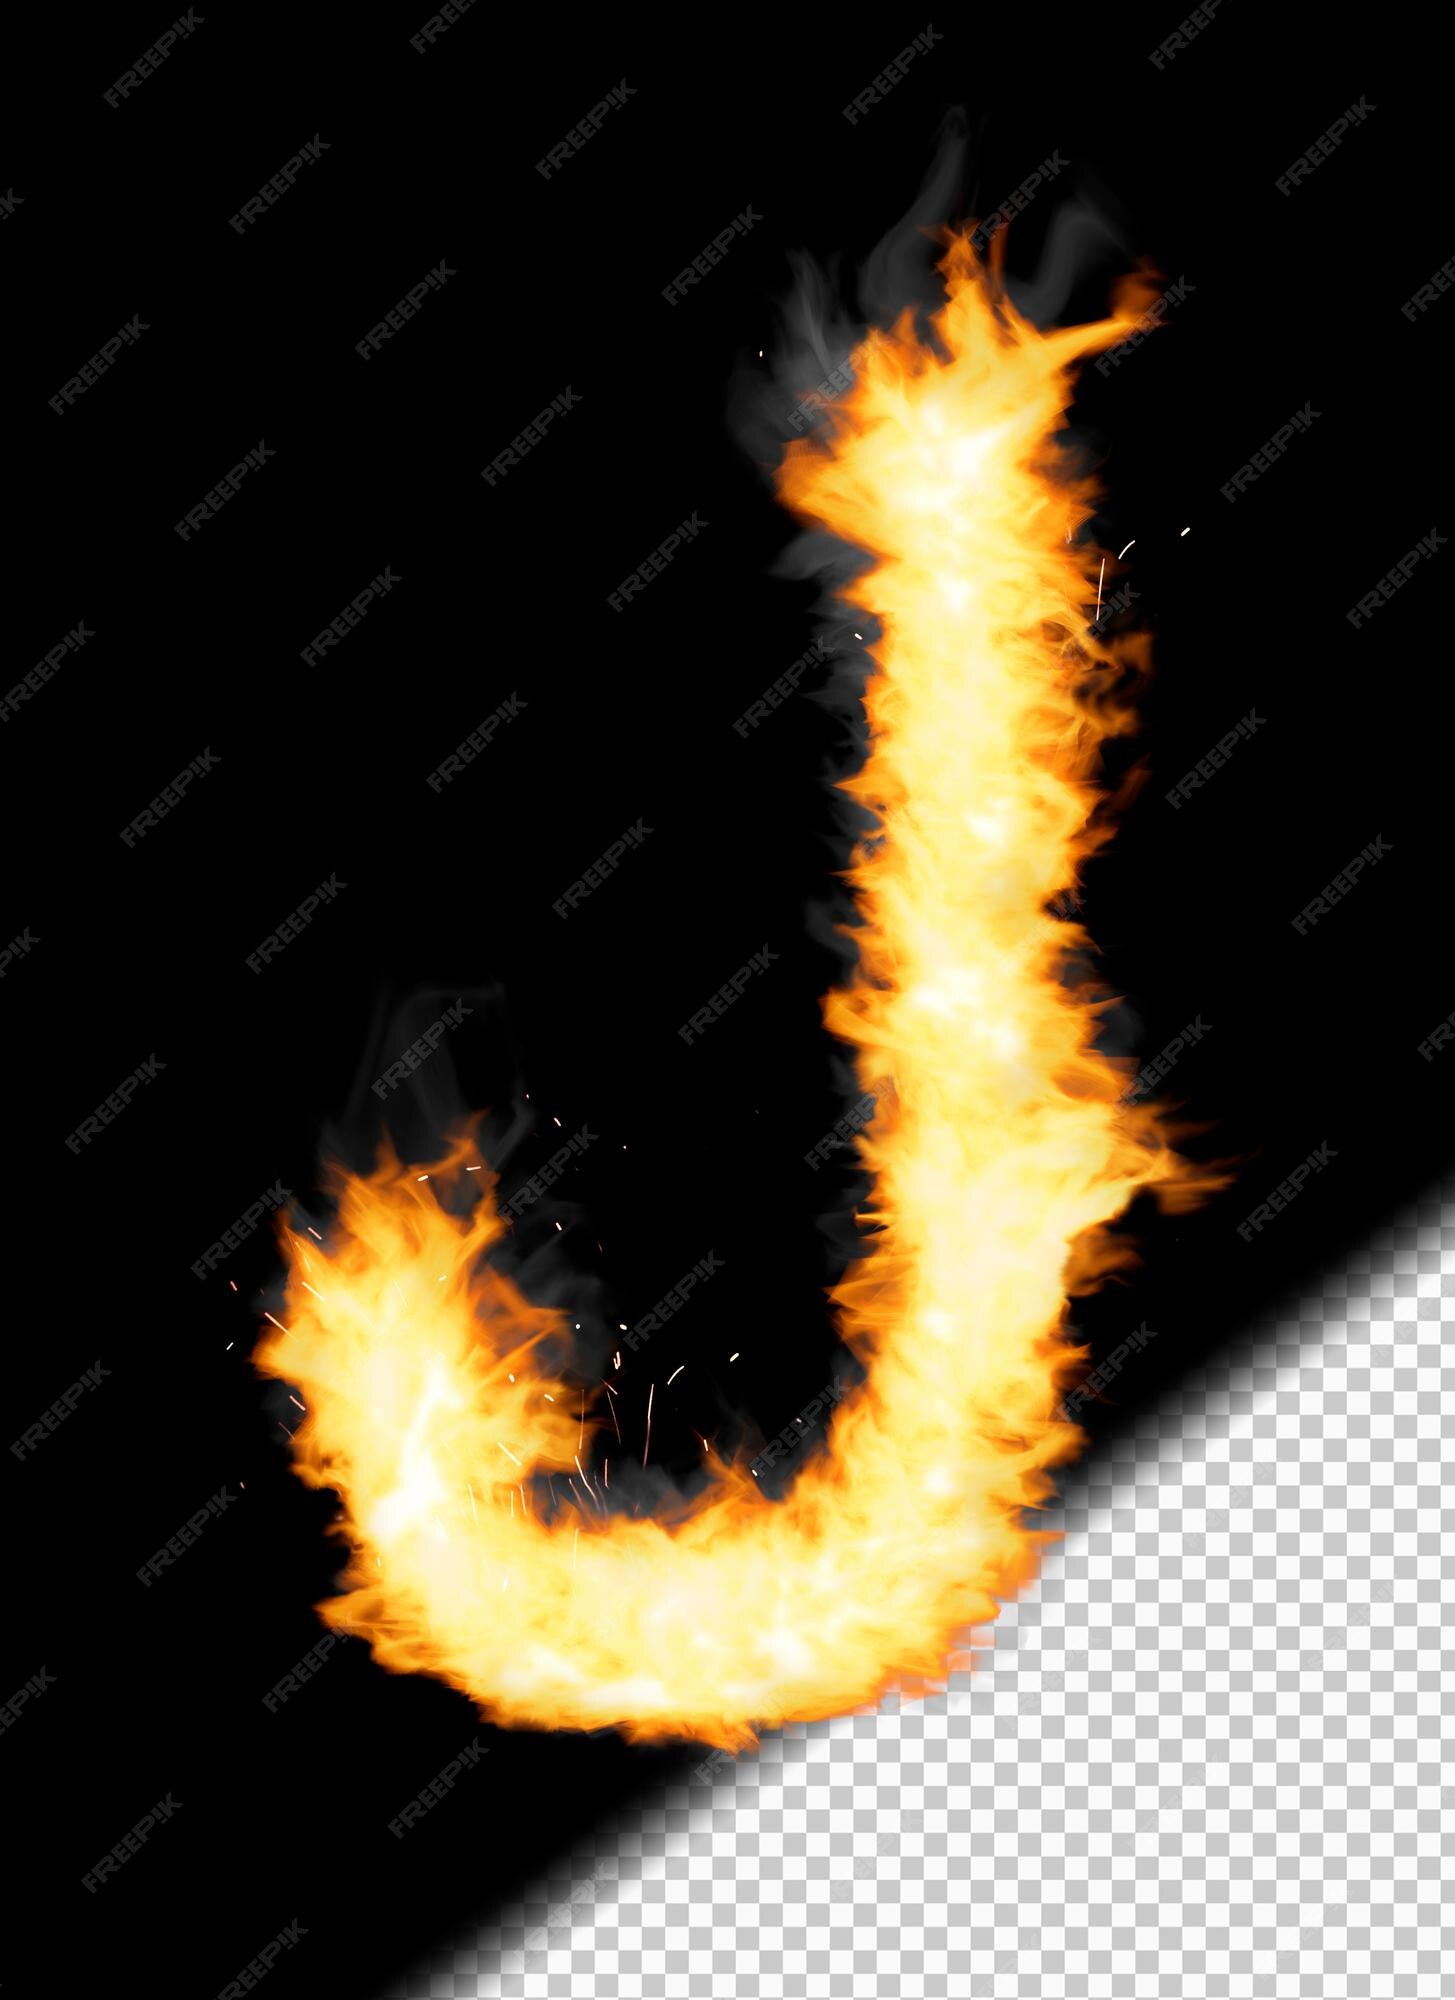 Free PSD | Realistic letter j made of fire on transparent background